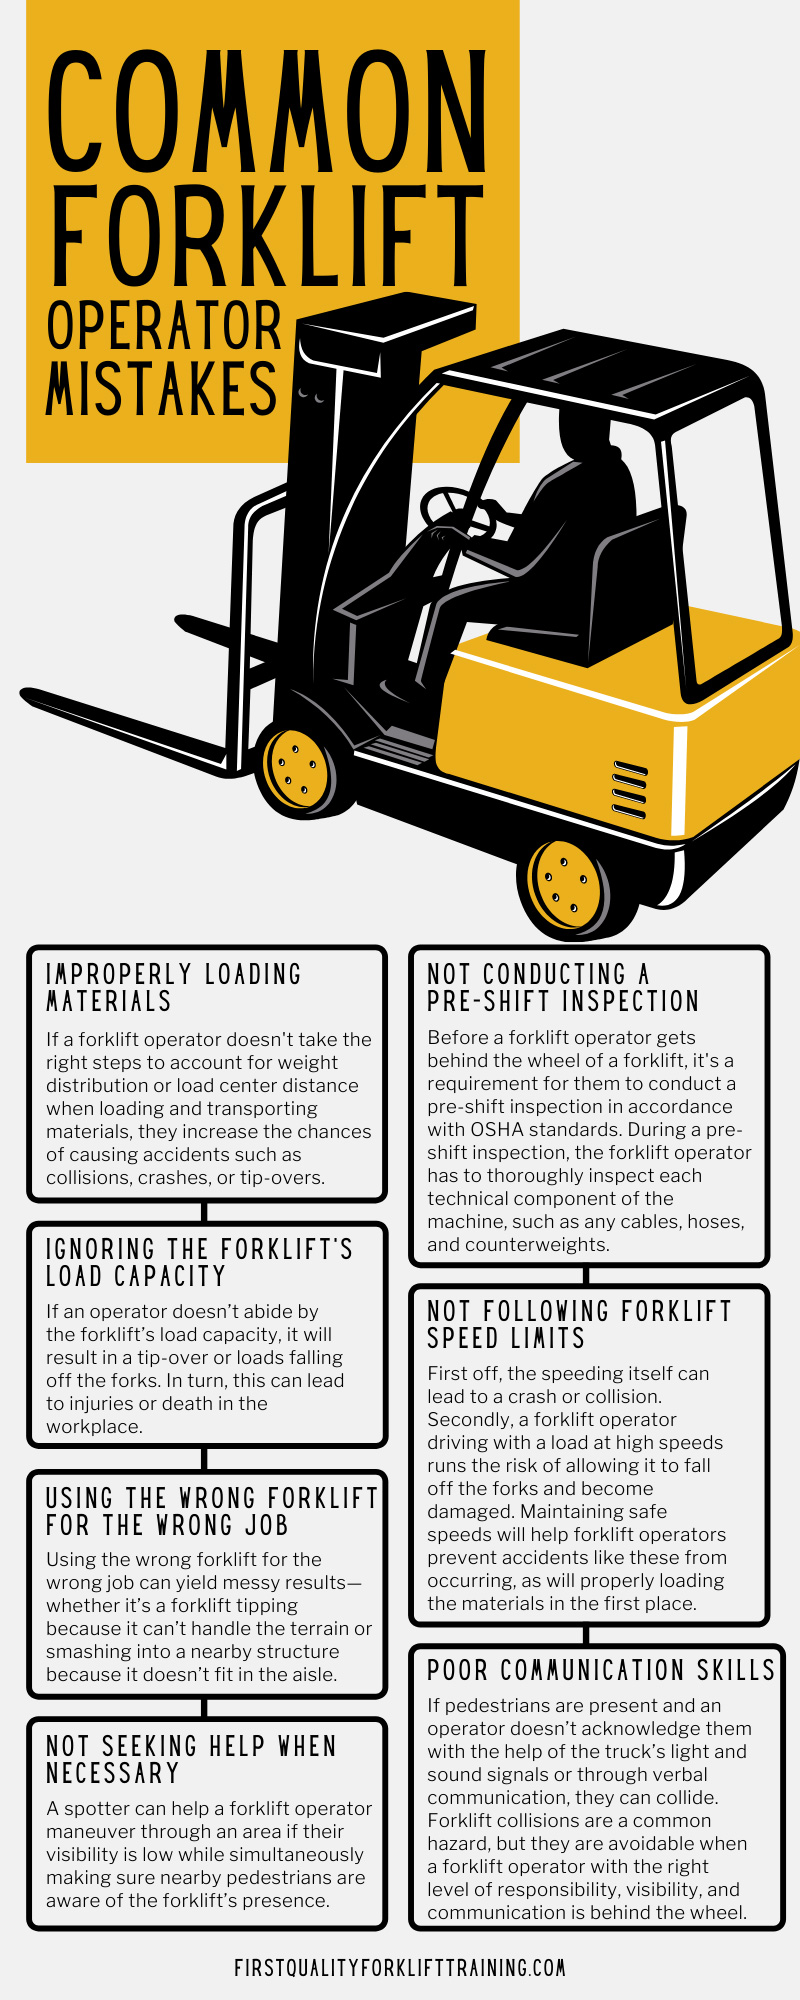 Common Forklift Operator Mistakes